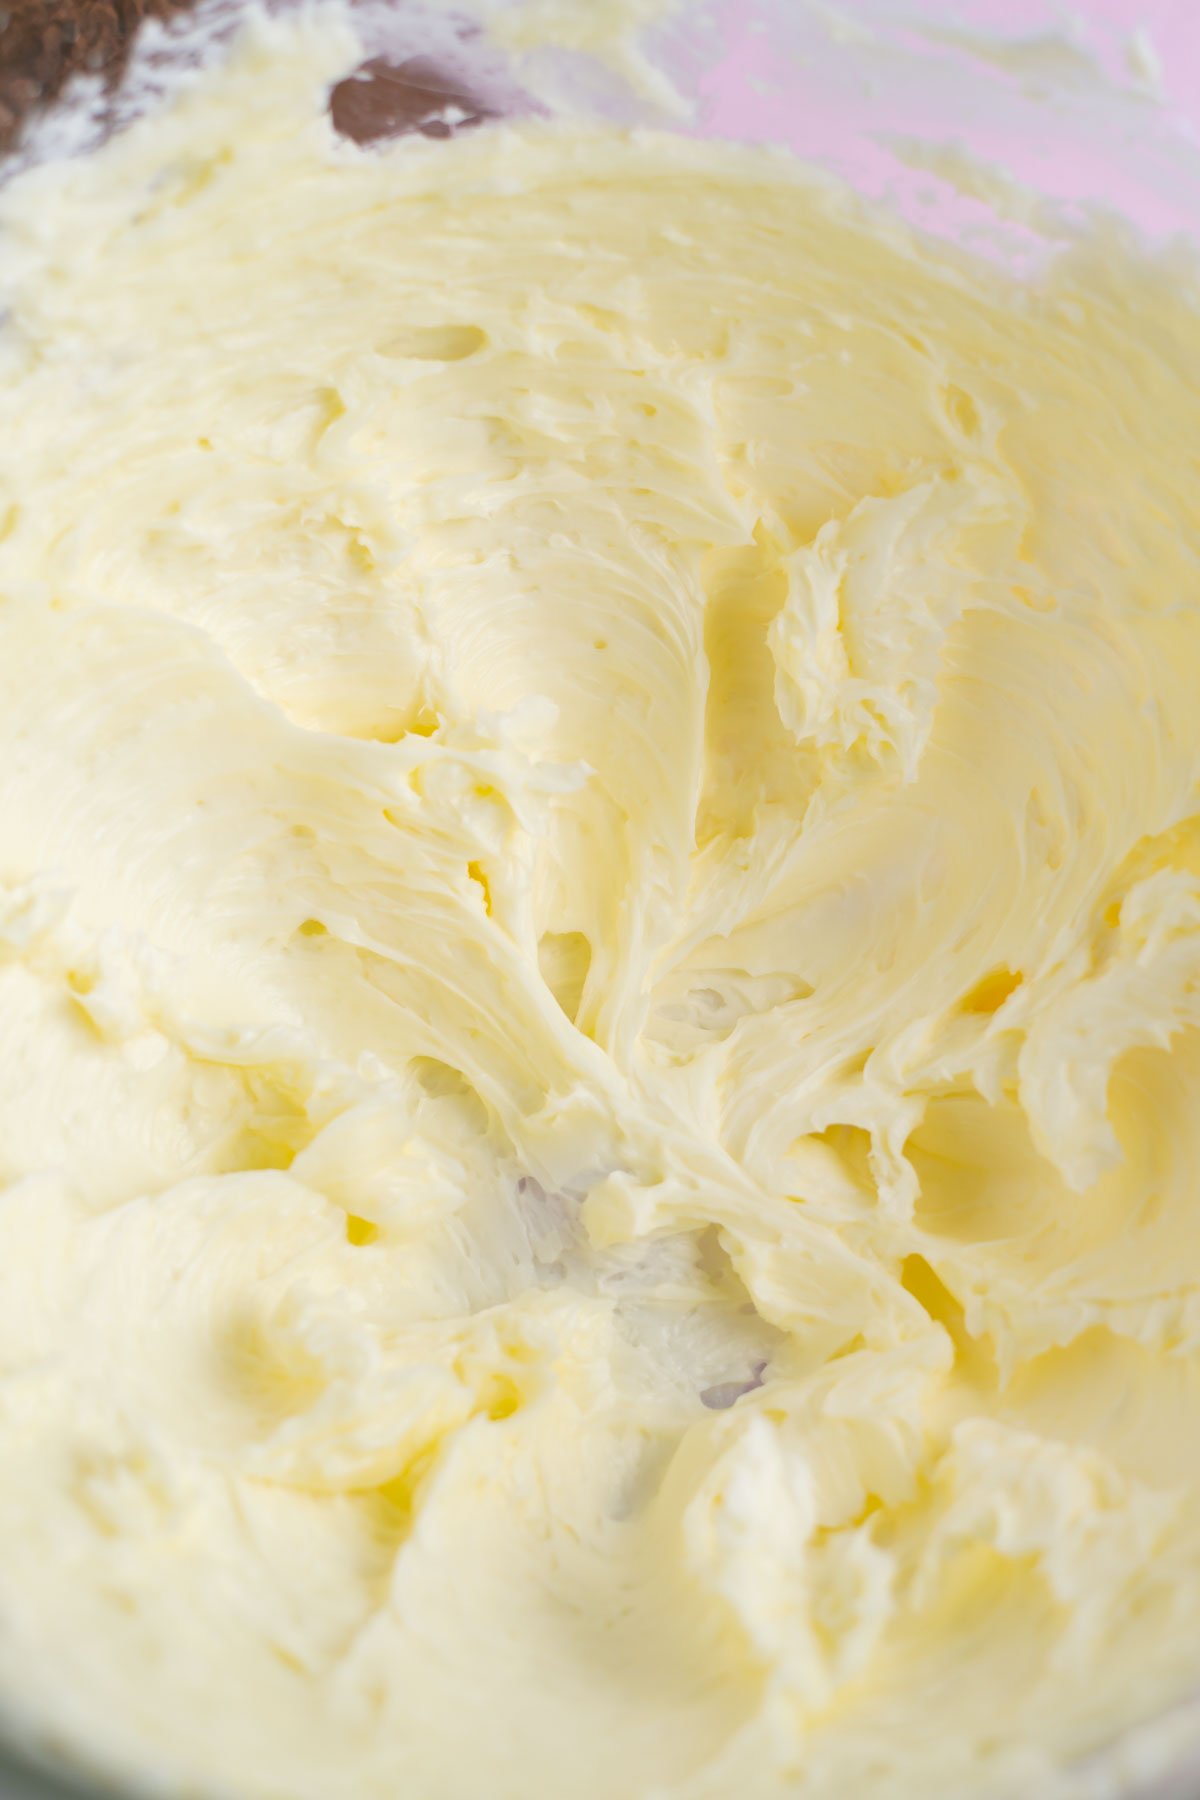 butter and salt creamed together in a mixing bowl